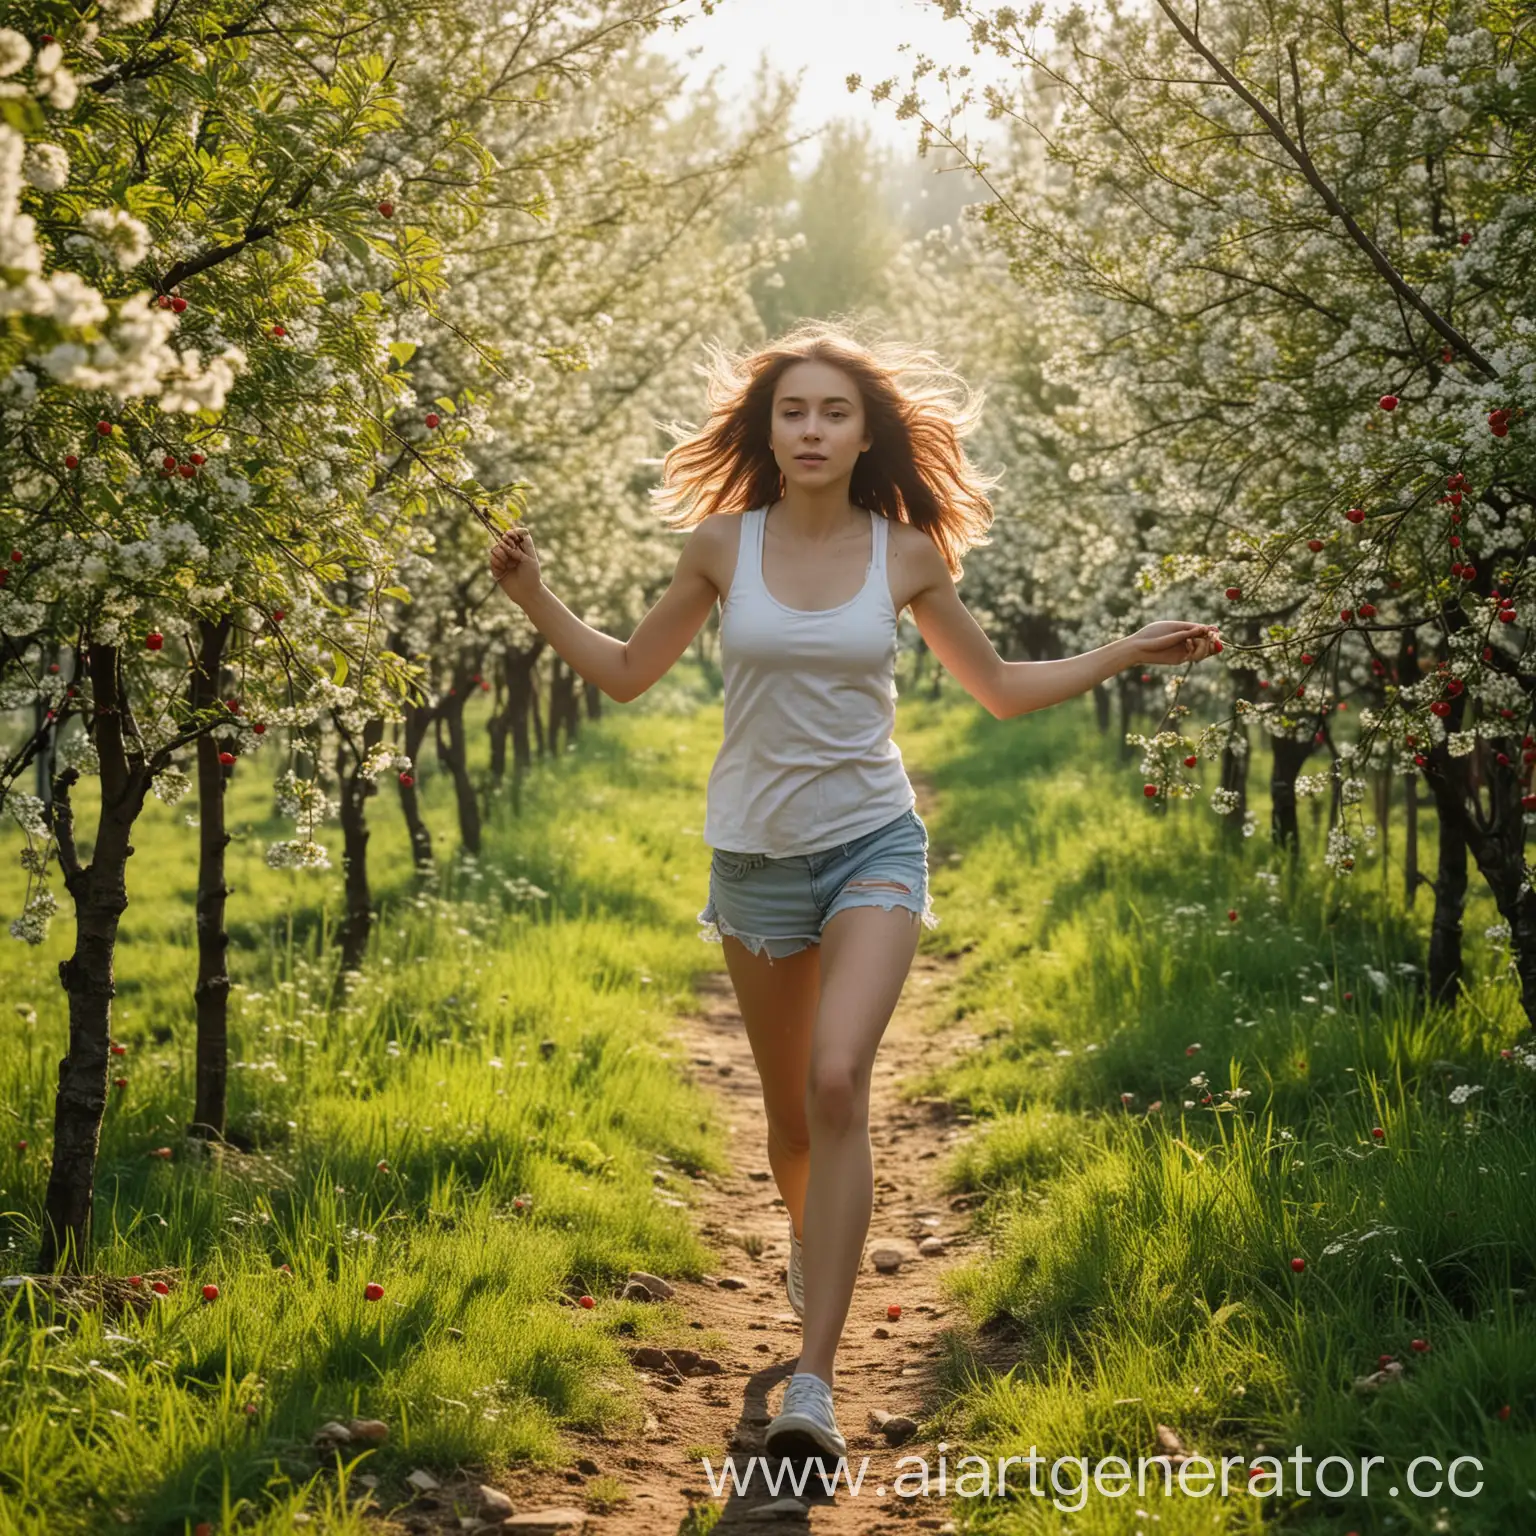 Young-Woman-Jogging-in-a-Cherry-Blossom-Garden